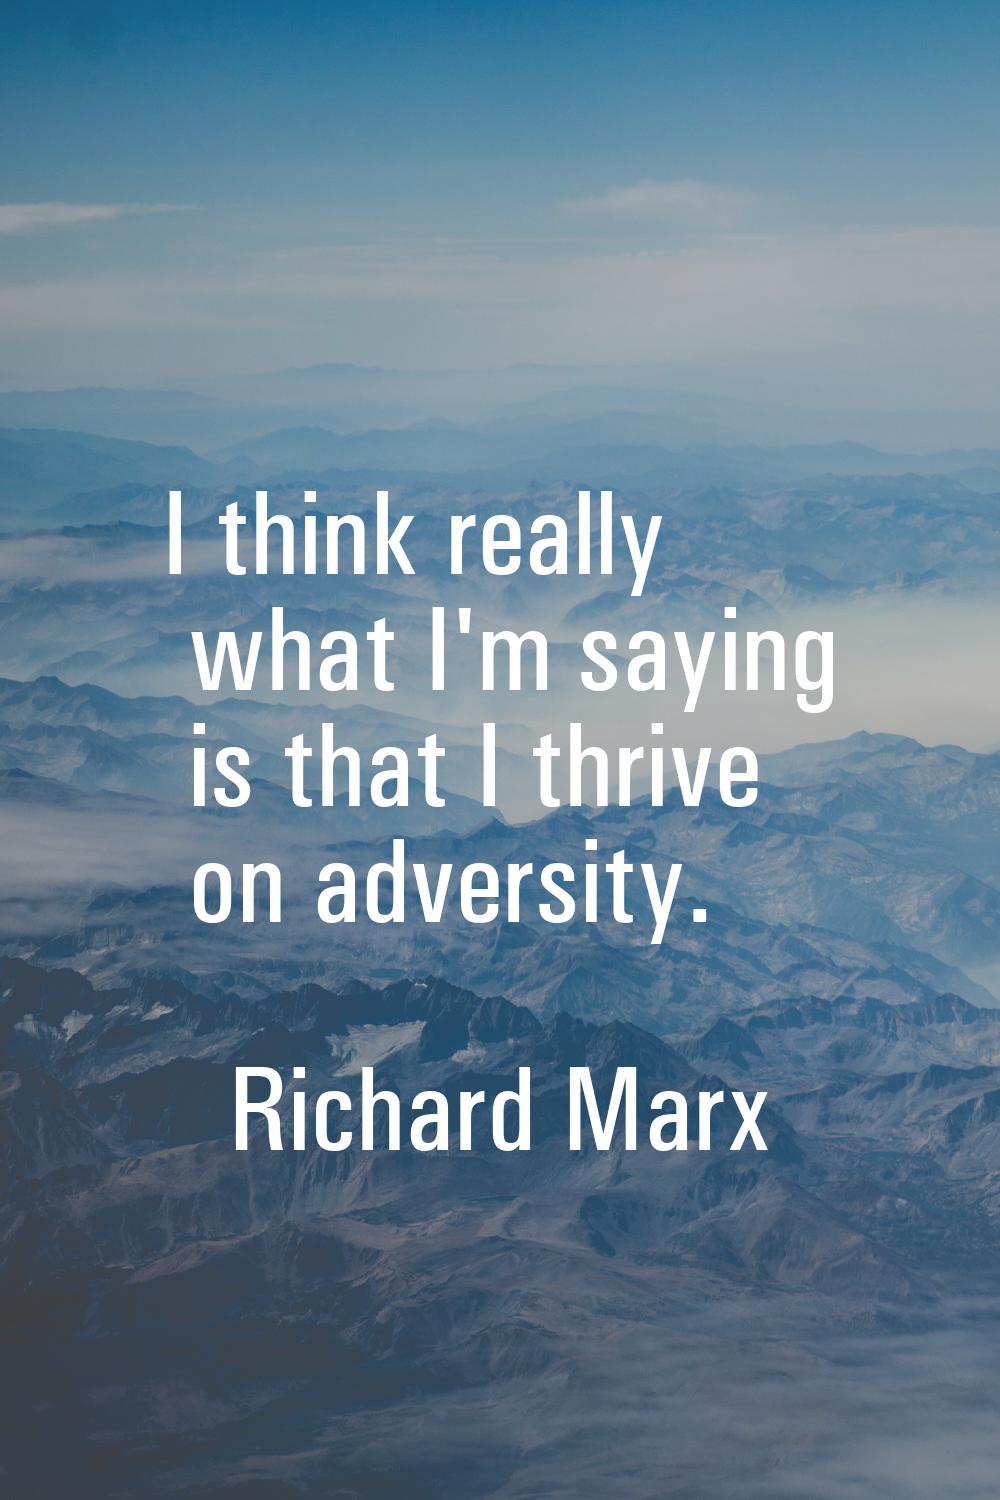 I think really what I'm saying is that I thrive on adversity.